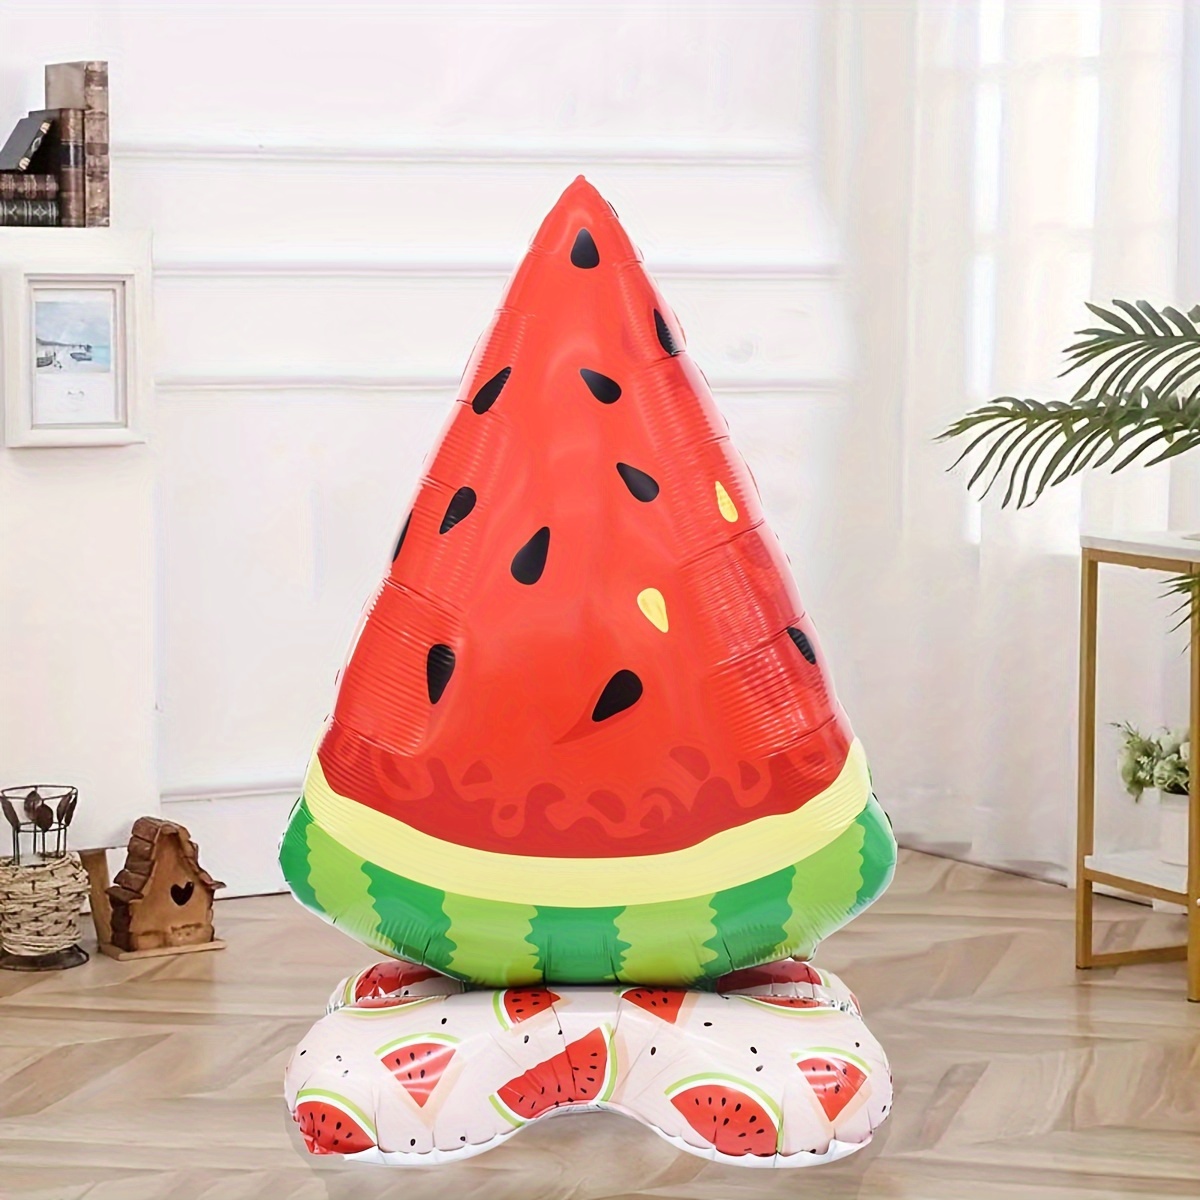 

1pc, 61-inch Extra Large Watermelon Shaped Base Aluminum Film Balloon - Perfect For Hawaiian Weddings, Summer Beach Birthday Party Decorations And Hawaiian Theme Party Supplies